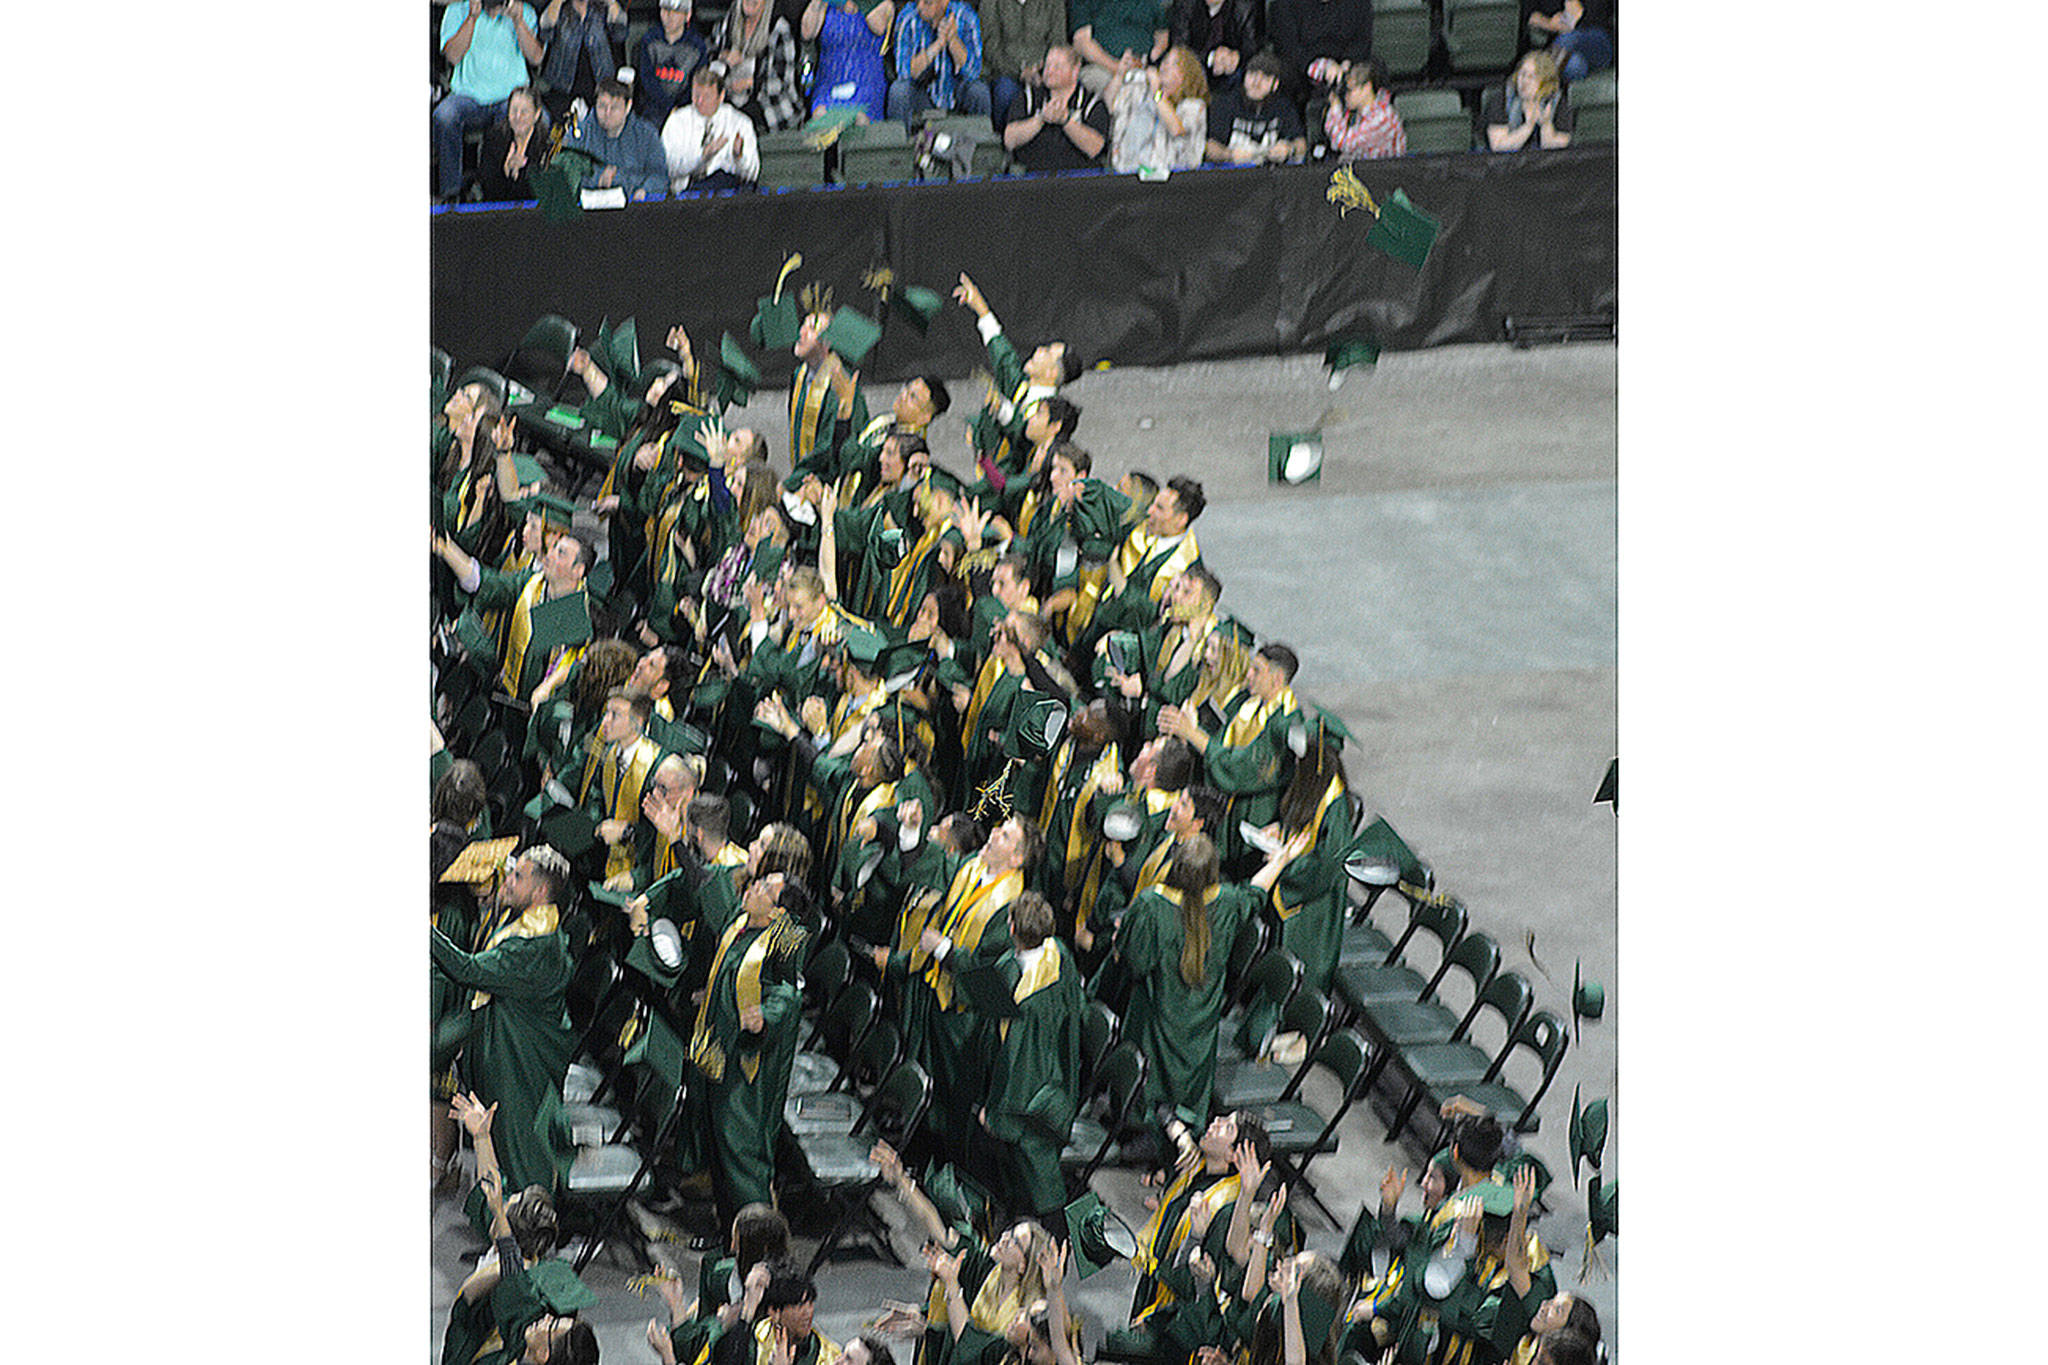 MG grads ready for the future (slide show)